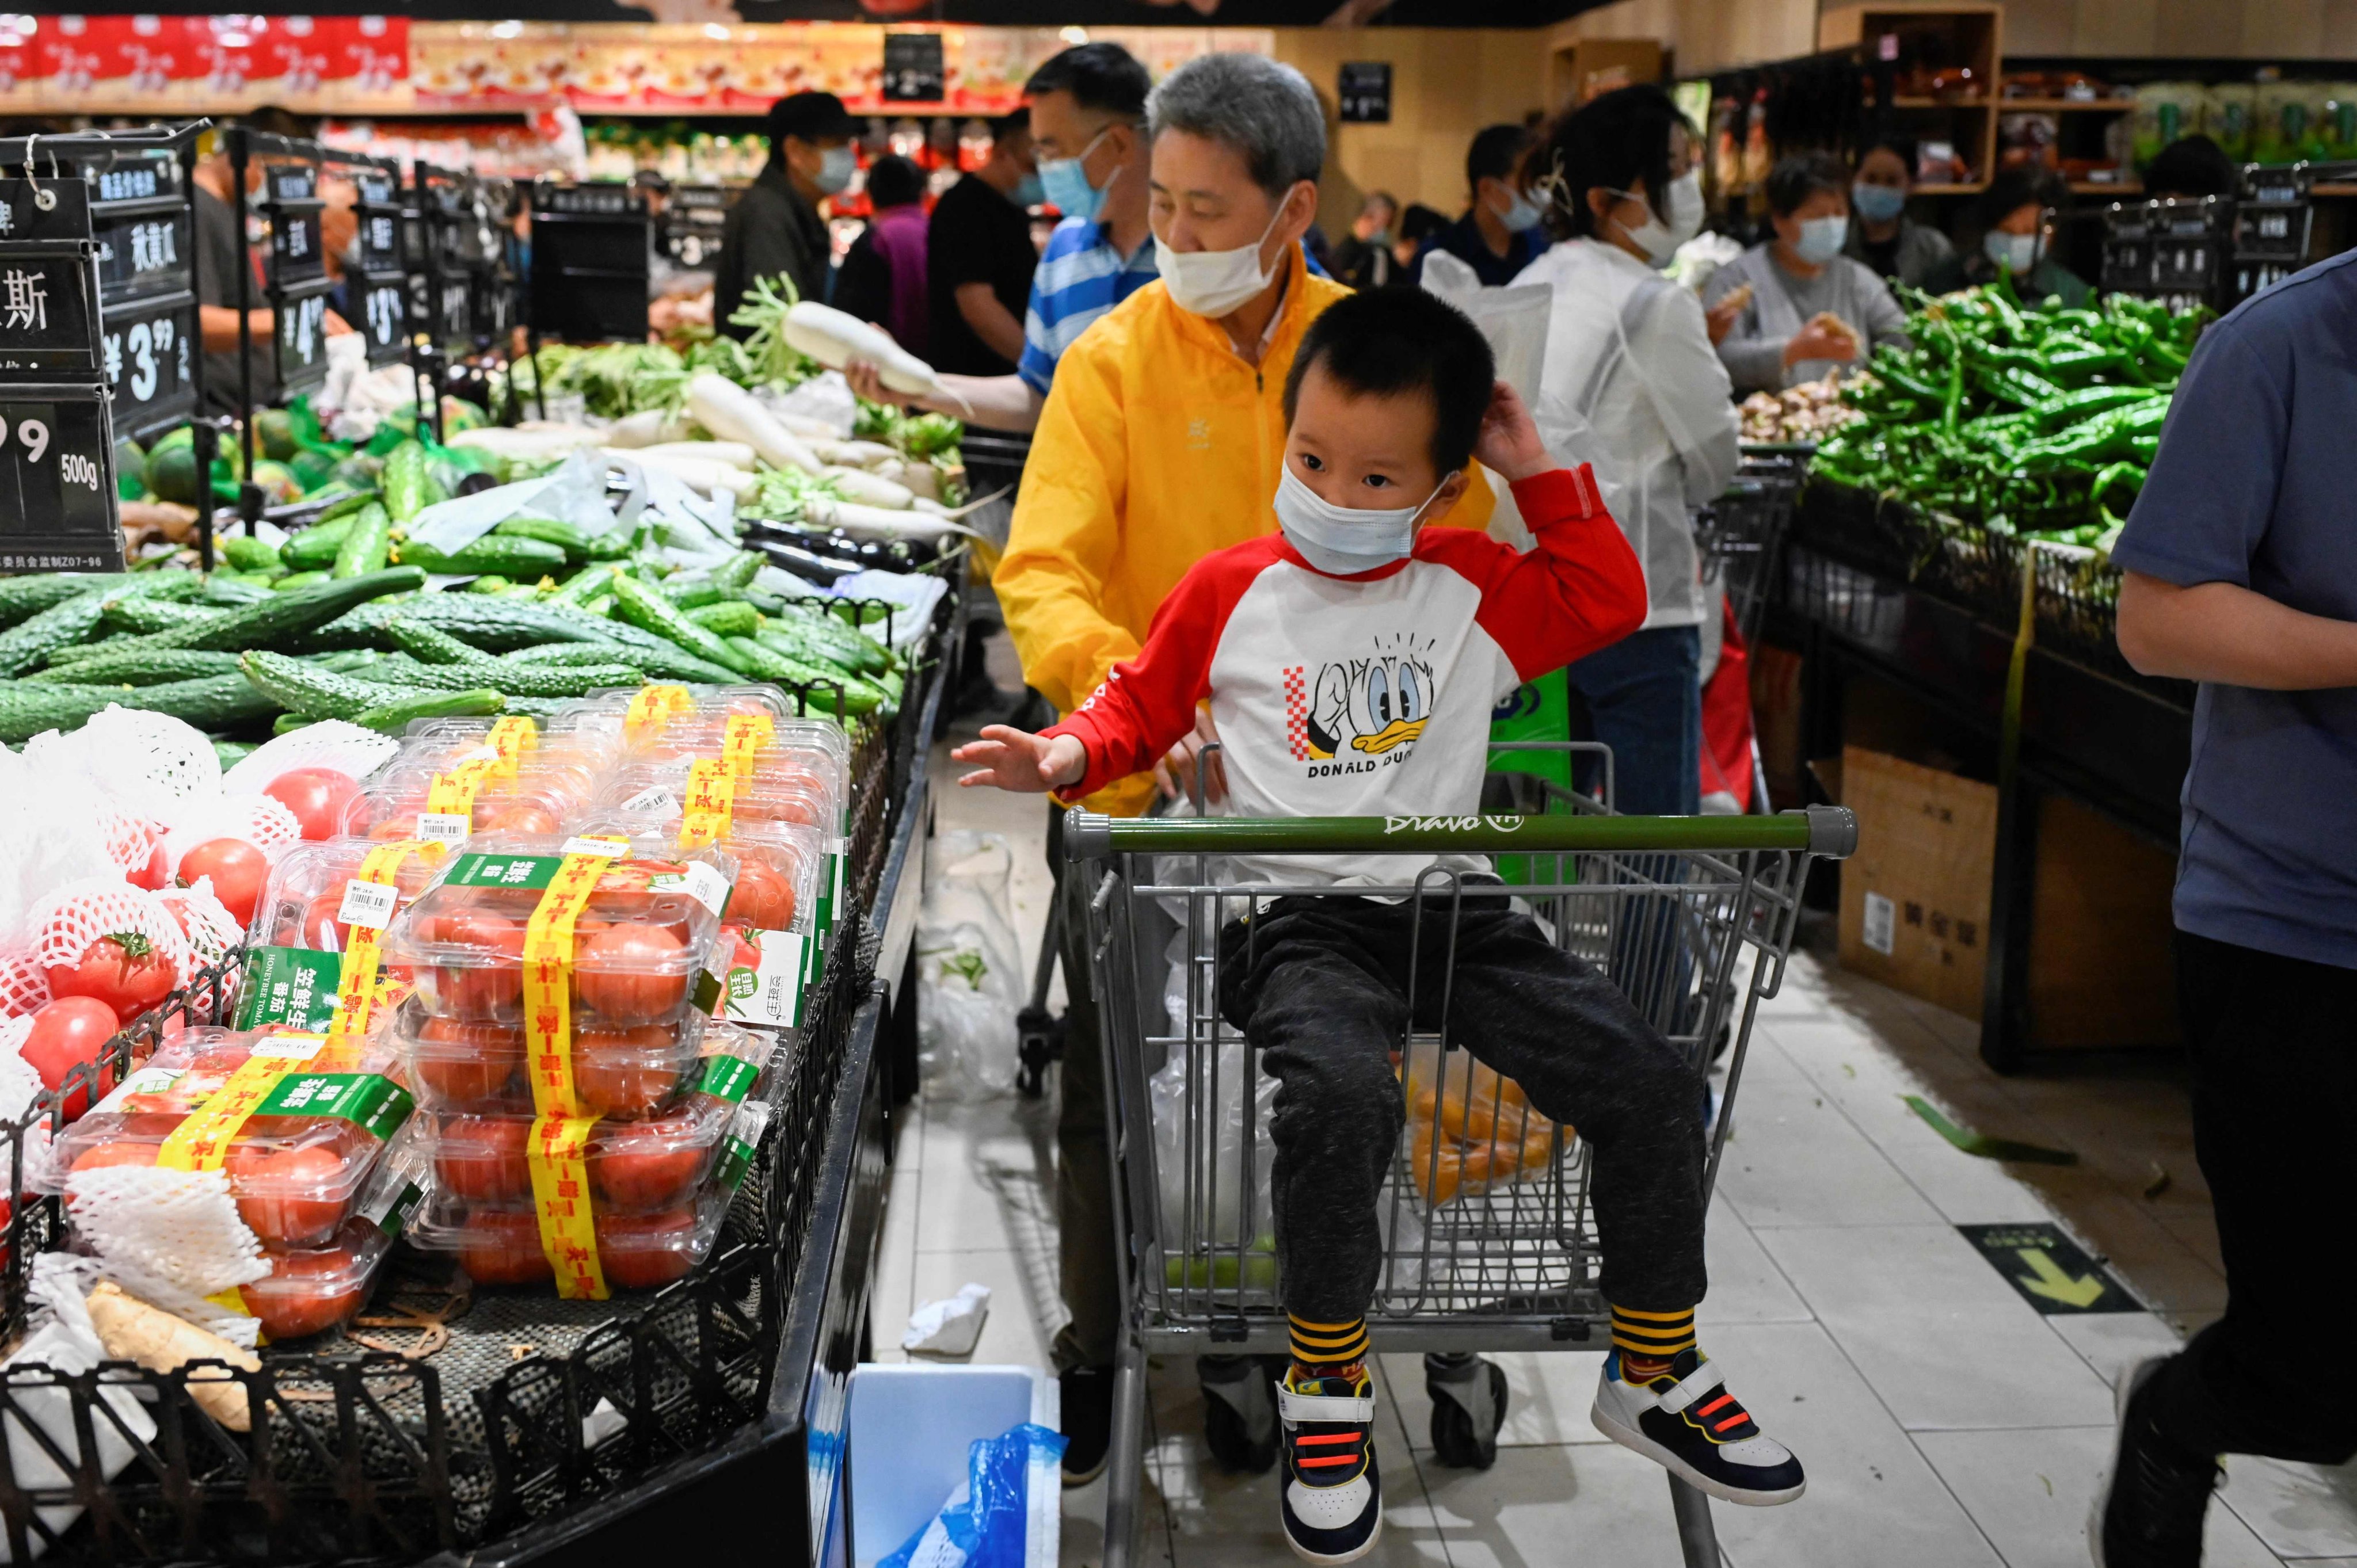 People shop at a supermarket in Beijing on April 25. China’s economy is growing well below the pace recorded from 2010 to 2019, removing a potential cushion that supported global growth during previous crises. Photo: AFP